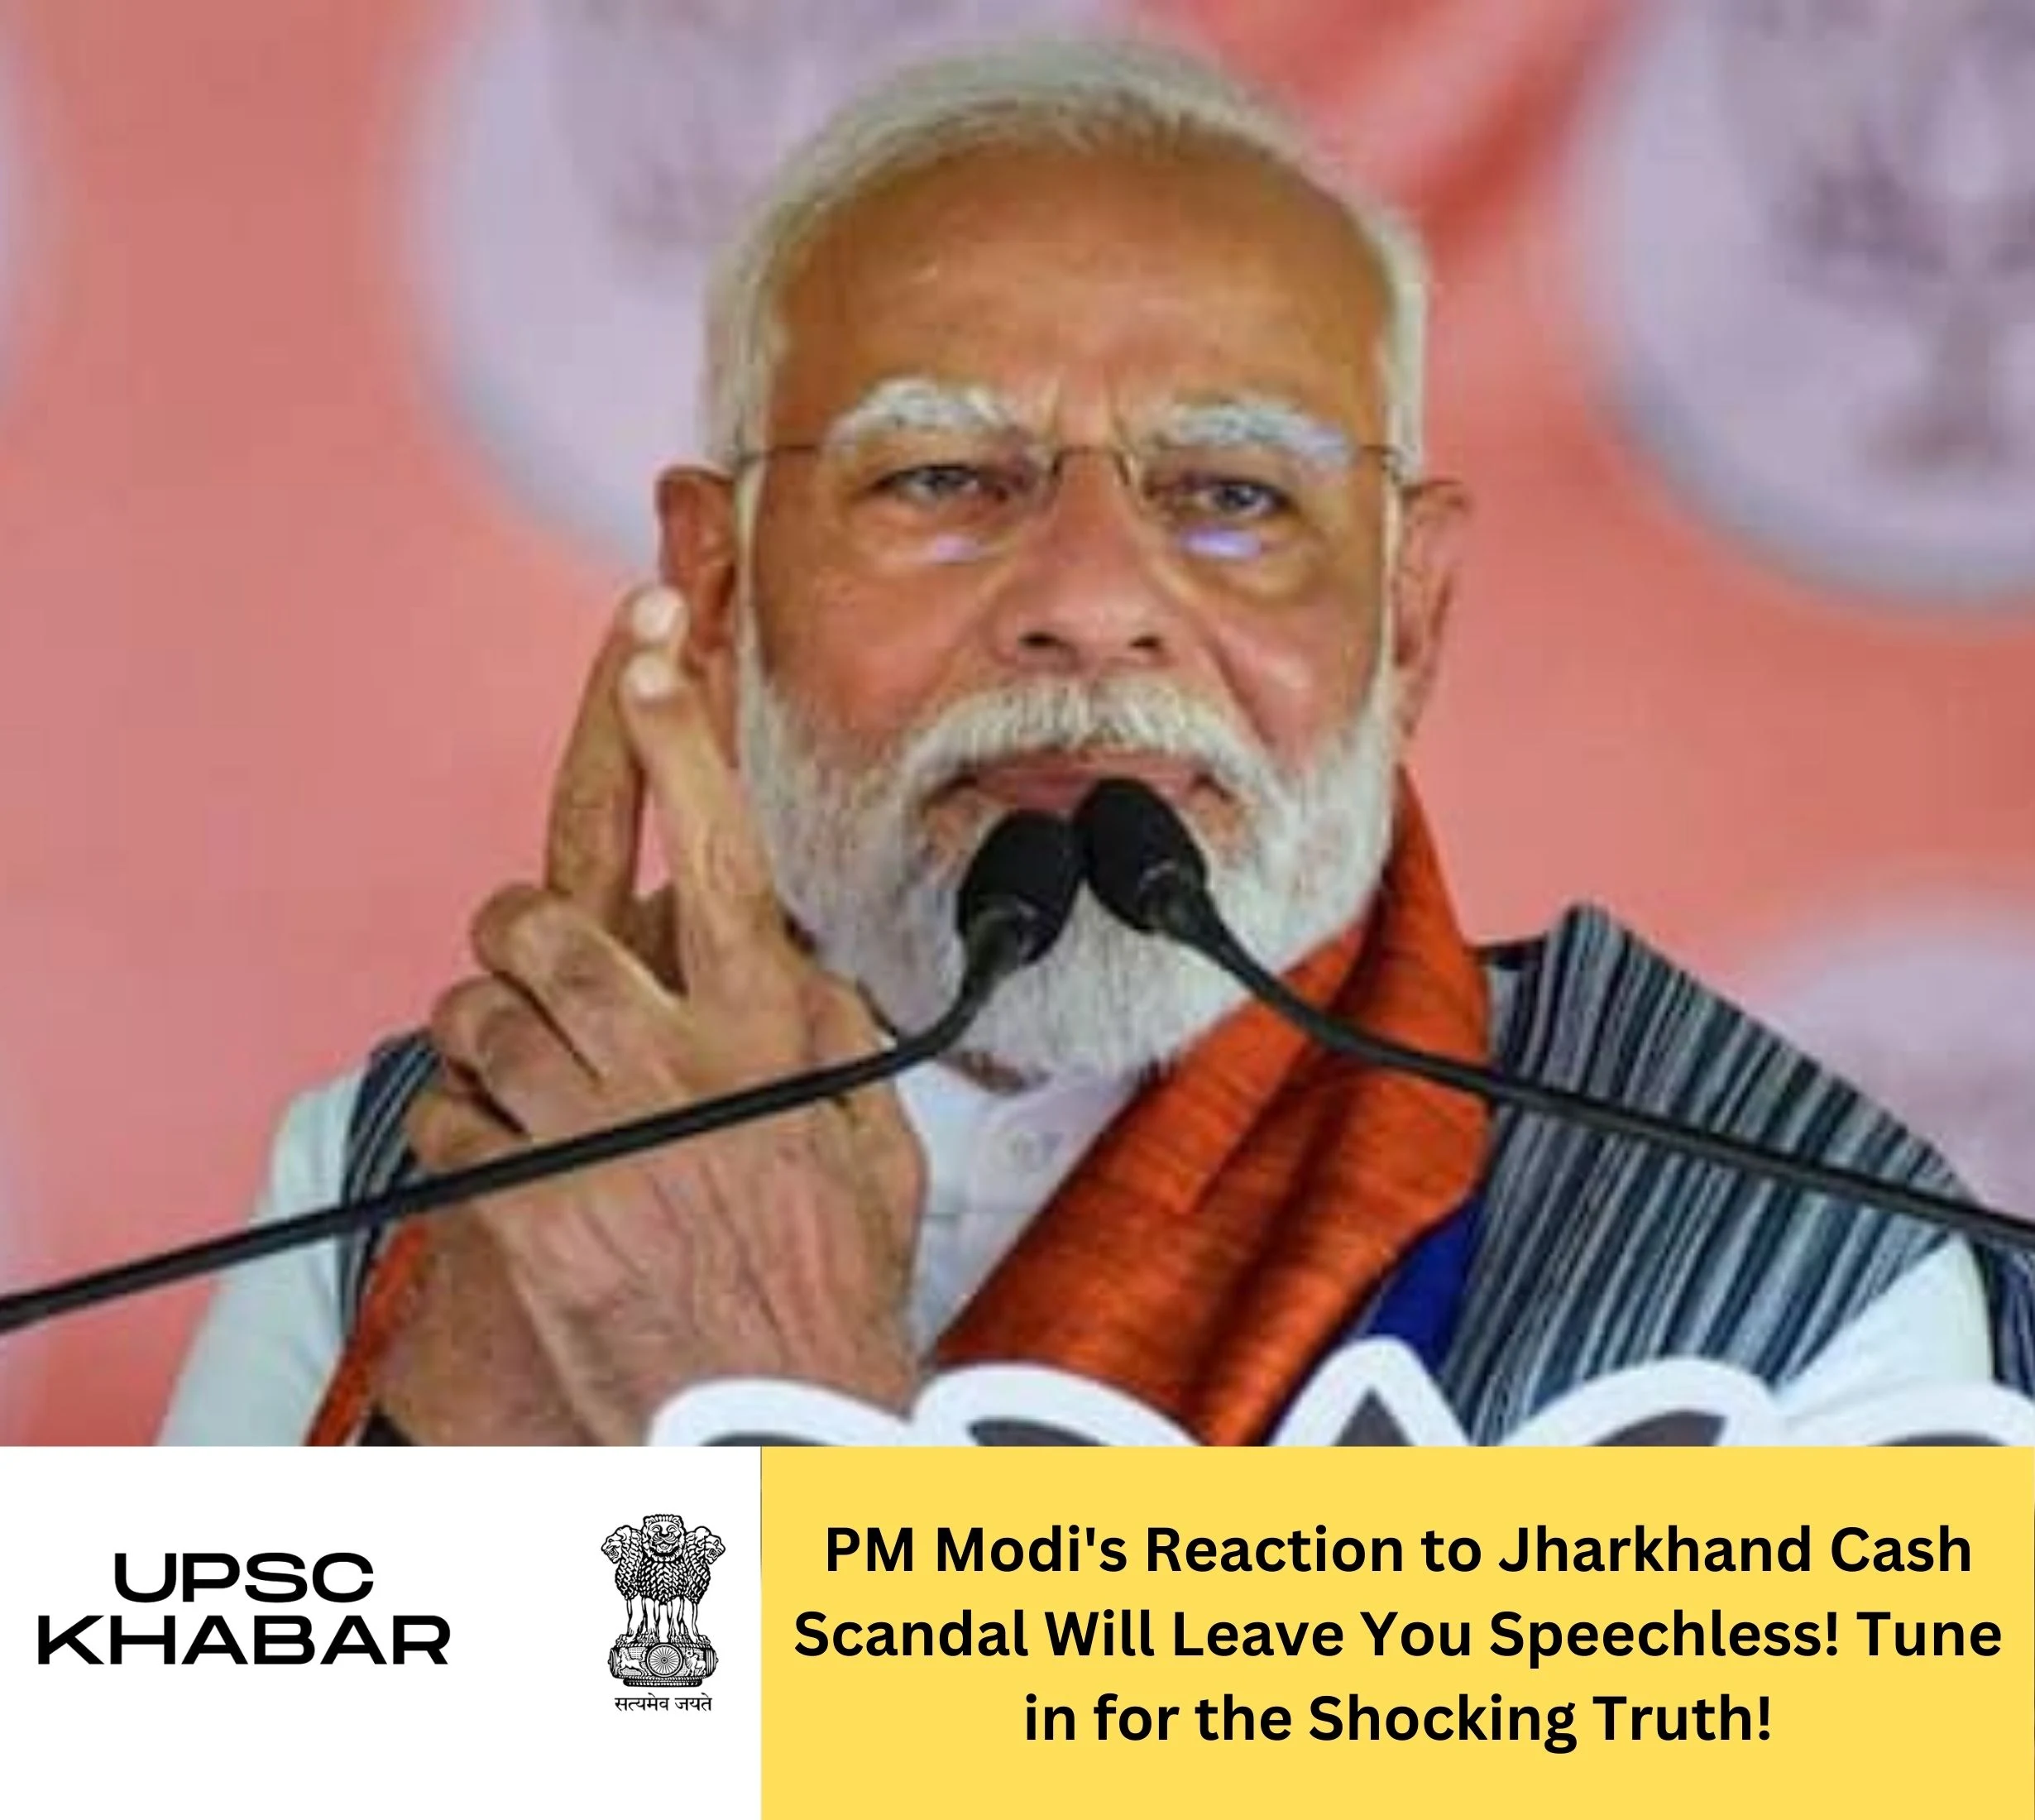 PM Modi's Reaction to Jharkhand Cash Scandal Will Leave You Speechless! Tune in for the Shocking Truth!